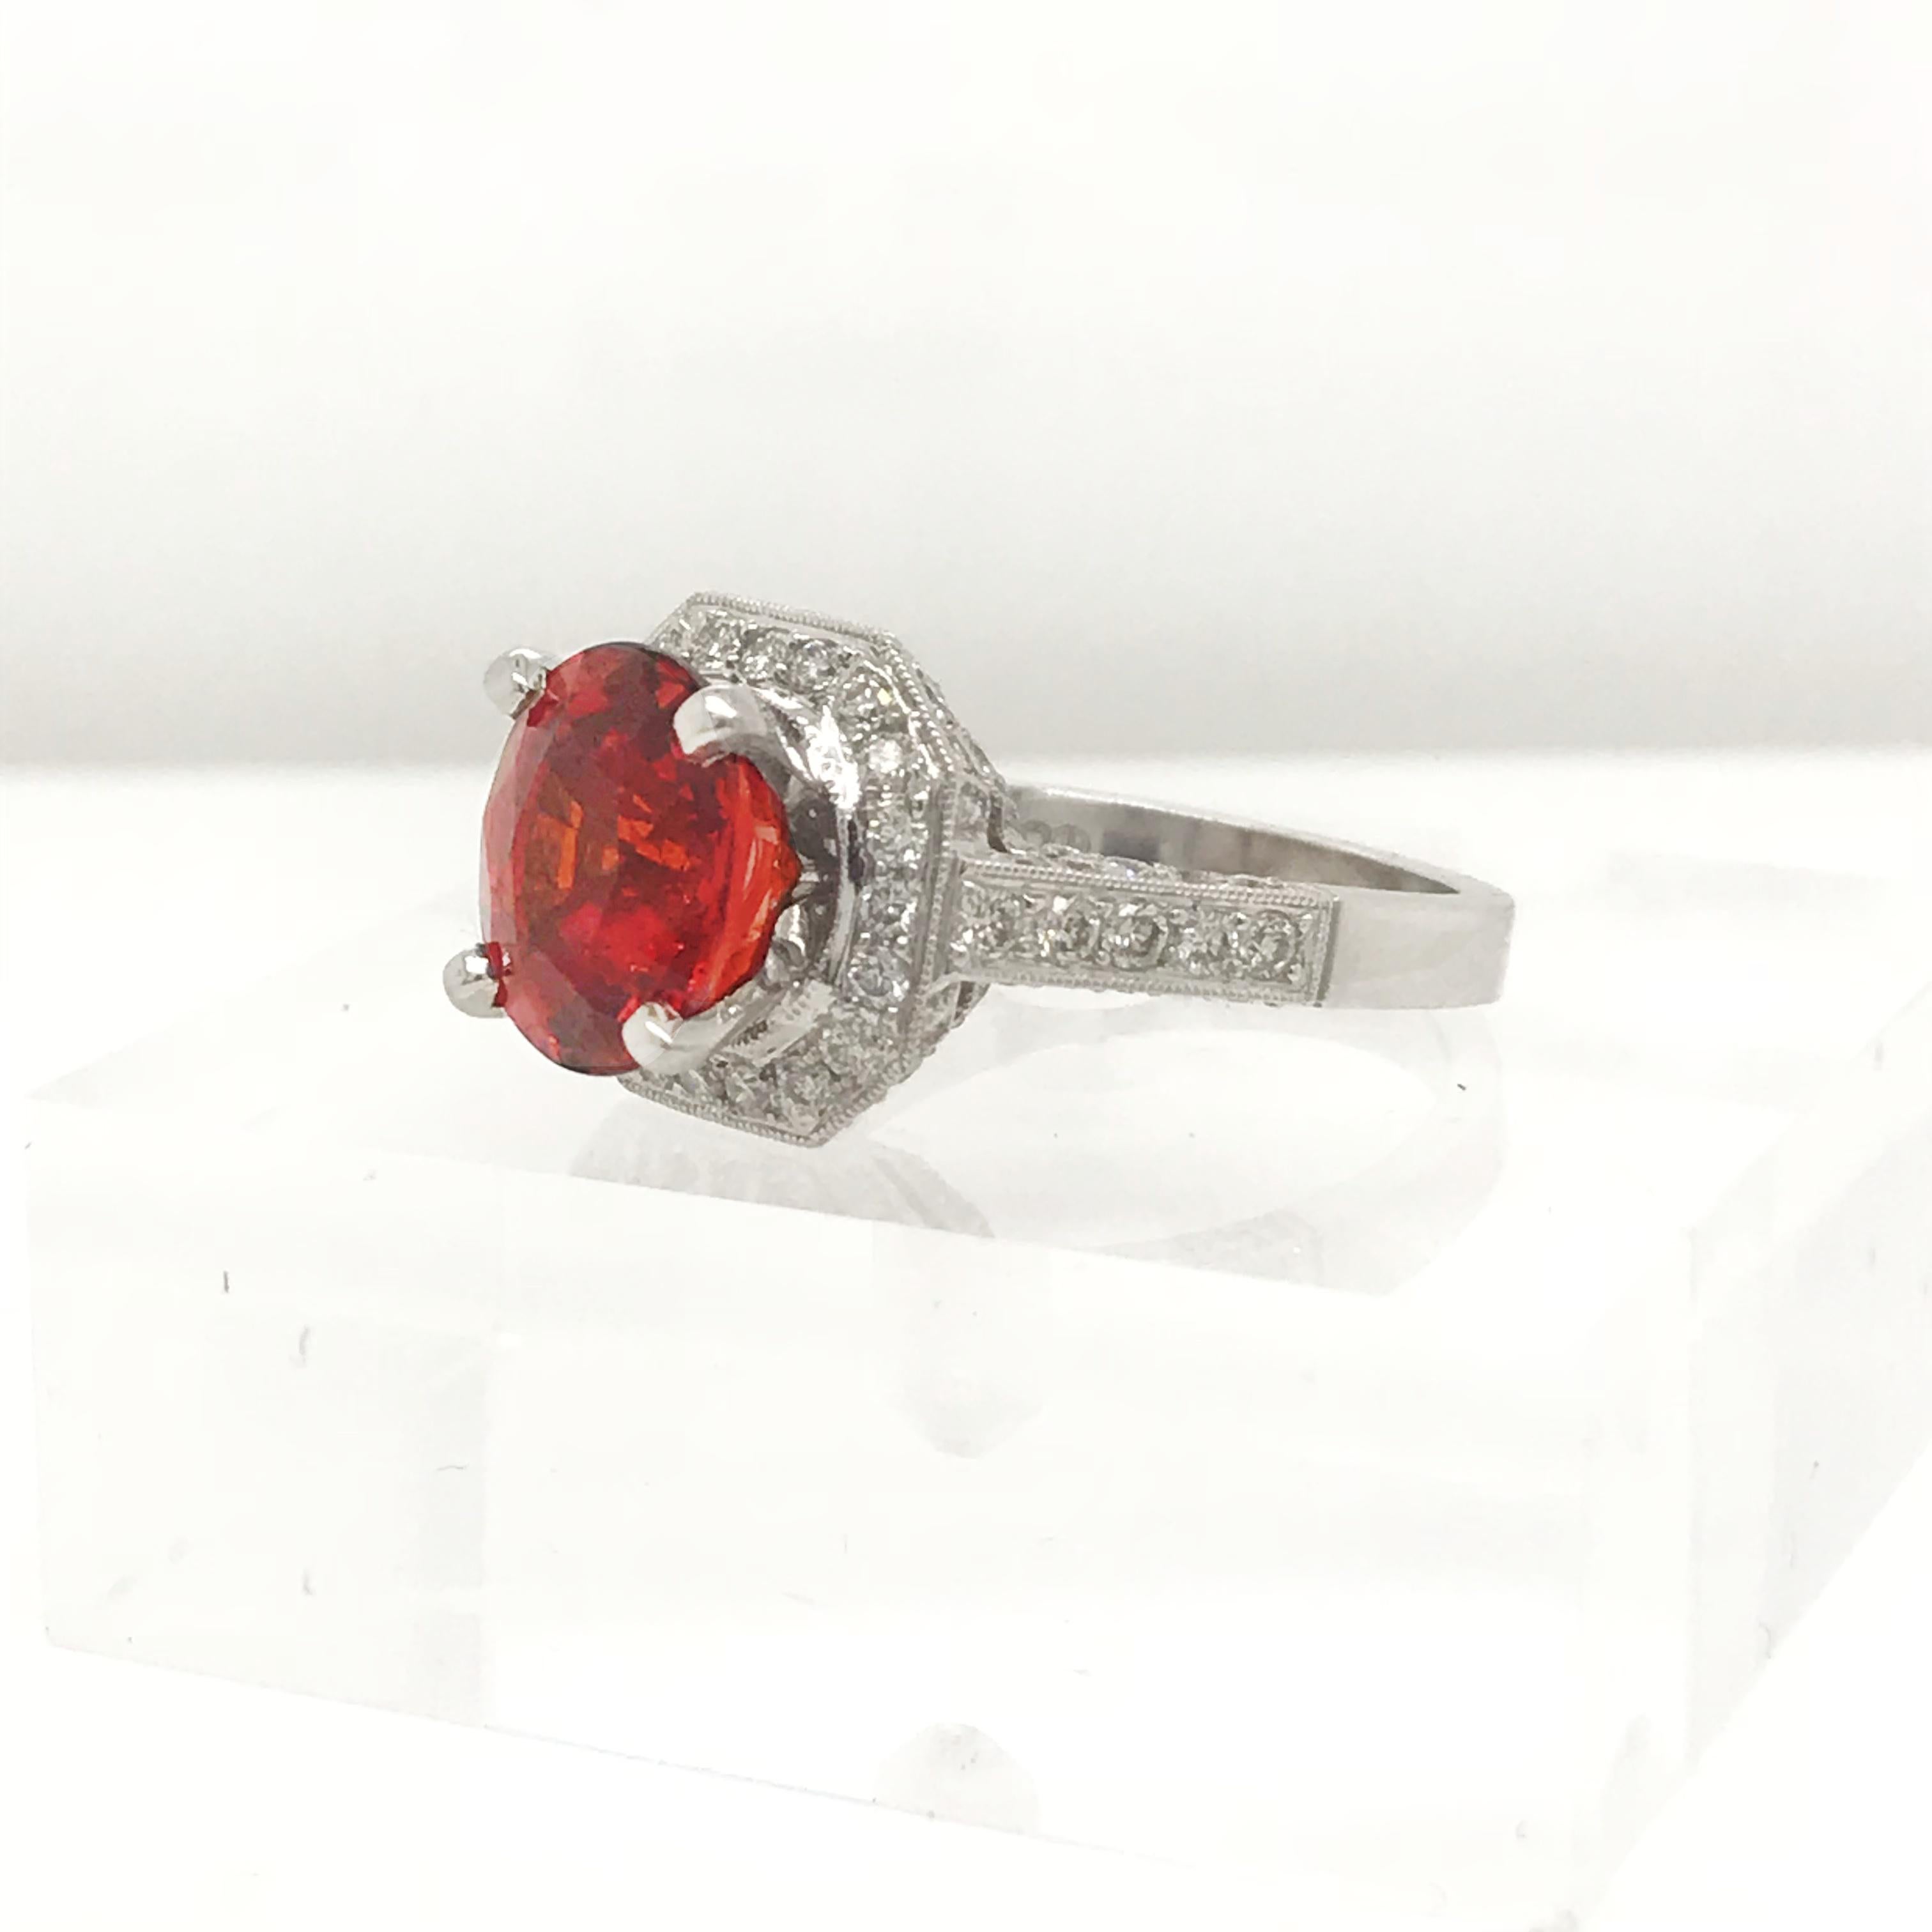 Amazing color saturation from this fine Spesserite Garnet set in 18kt white gold. There is 1 carat of colorless diamonds set within the 18kt white gold setting.
Oval cut Spessertite Garnet = 5.06 Carats
(84) Round Brilliant Cut Diamonds = 1.00